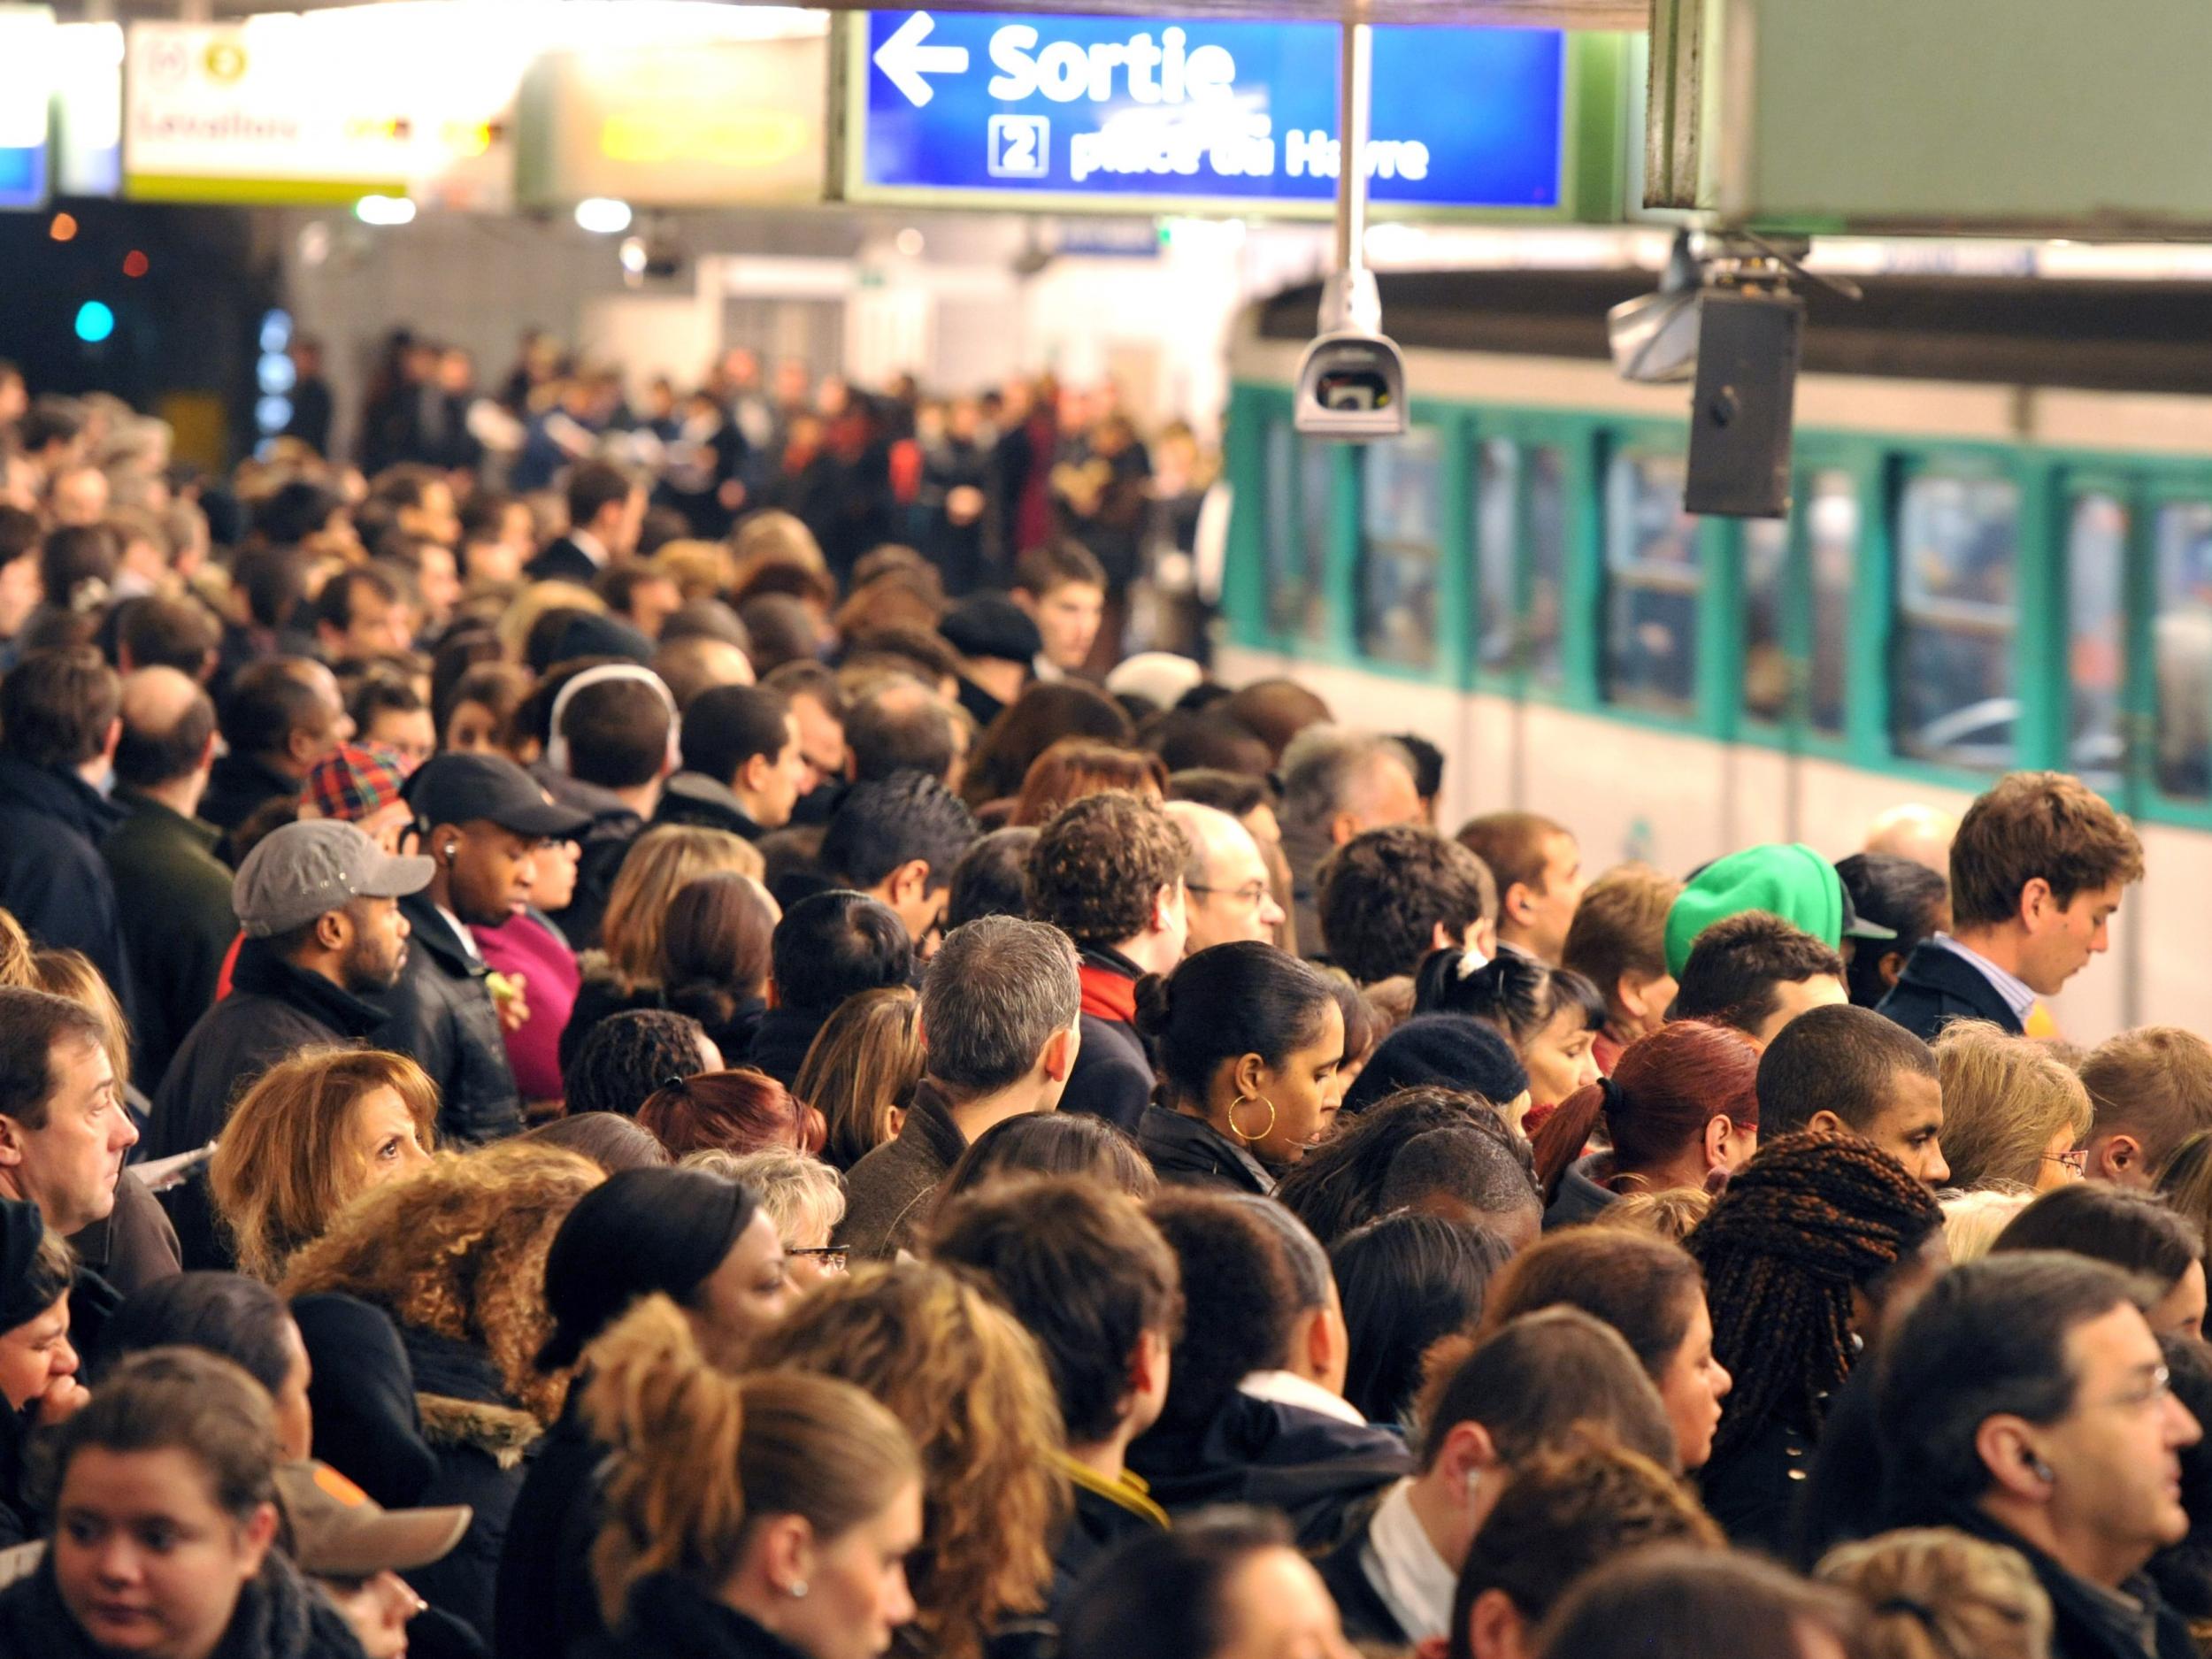 Commuters wait on a crowded platform at Saint-Lazare metro station during delays caused by strike action in Paris on 11 December, 2009